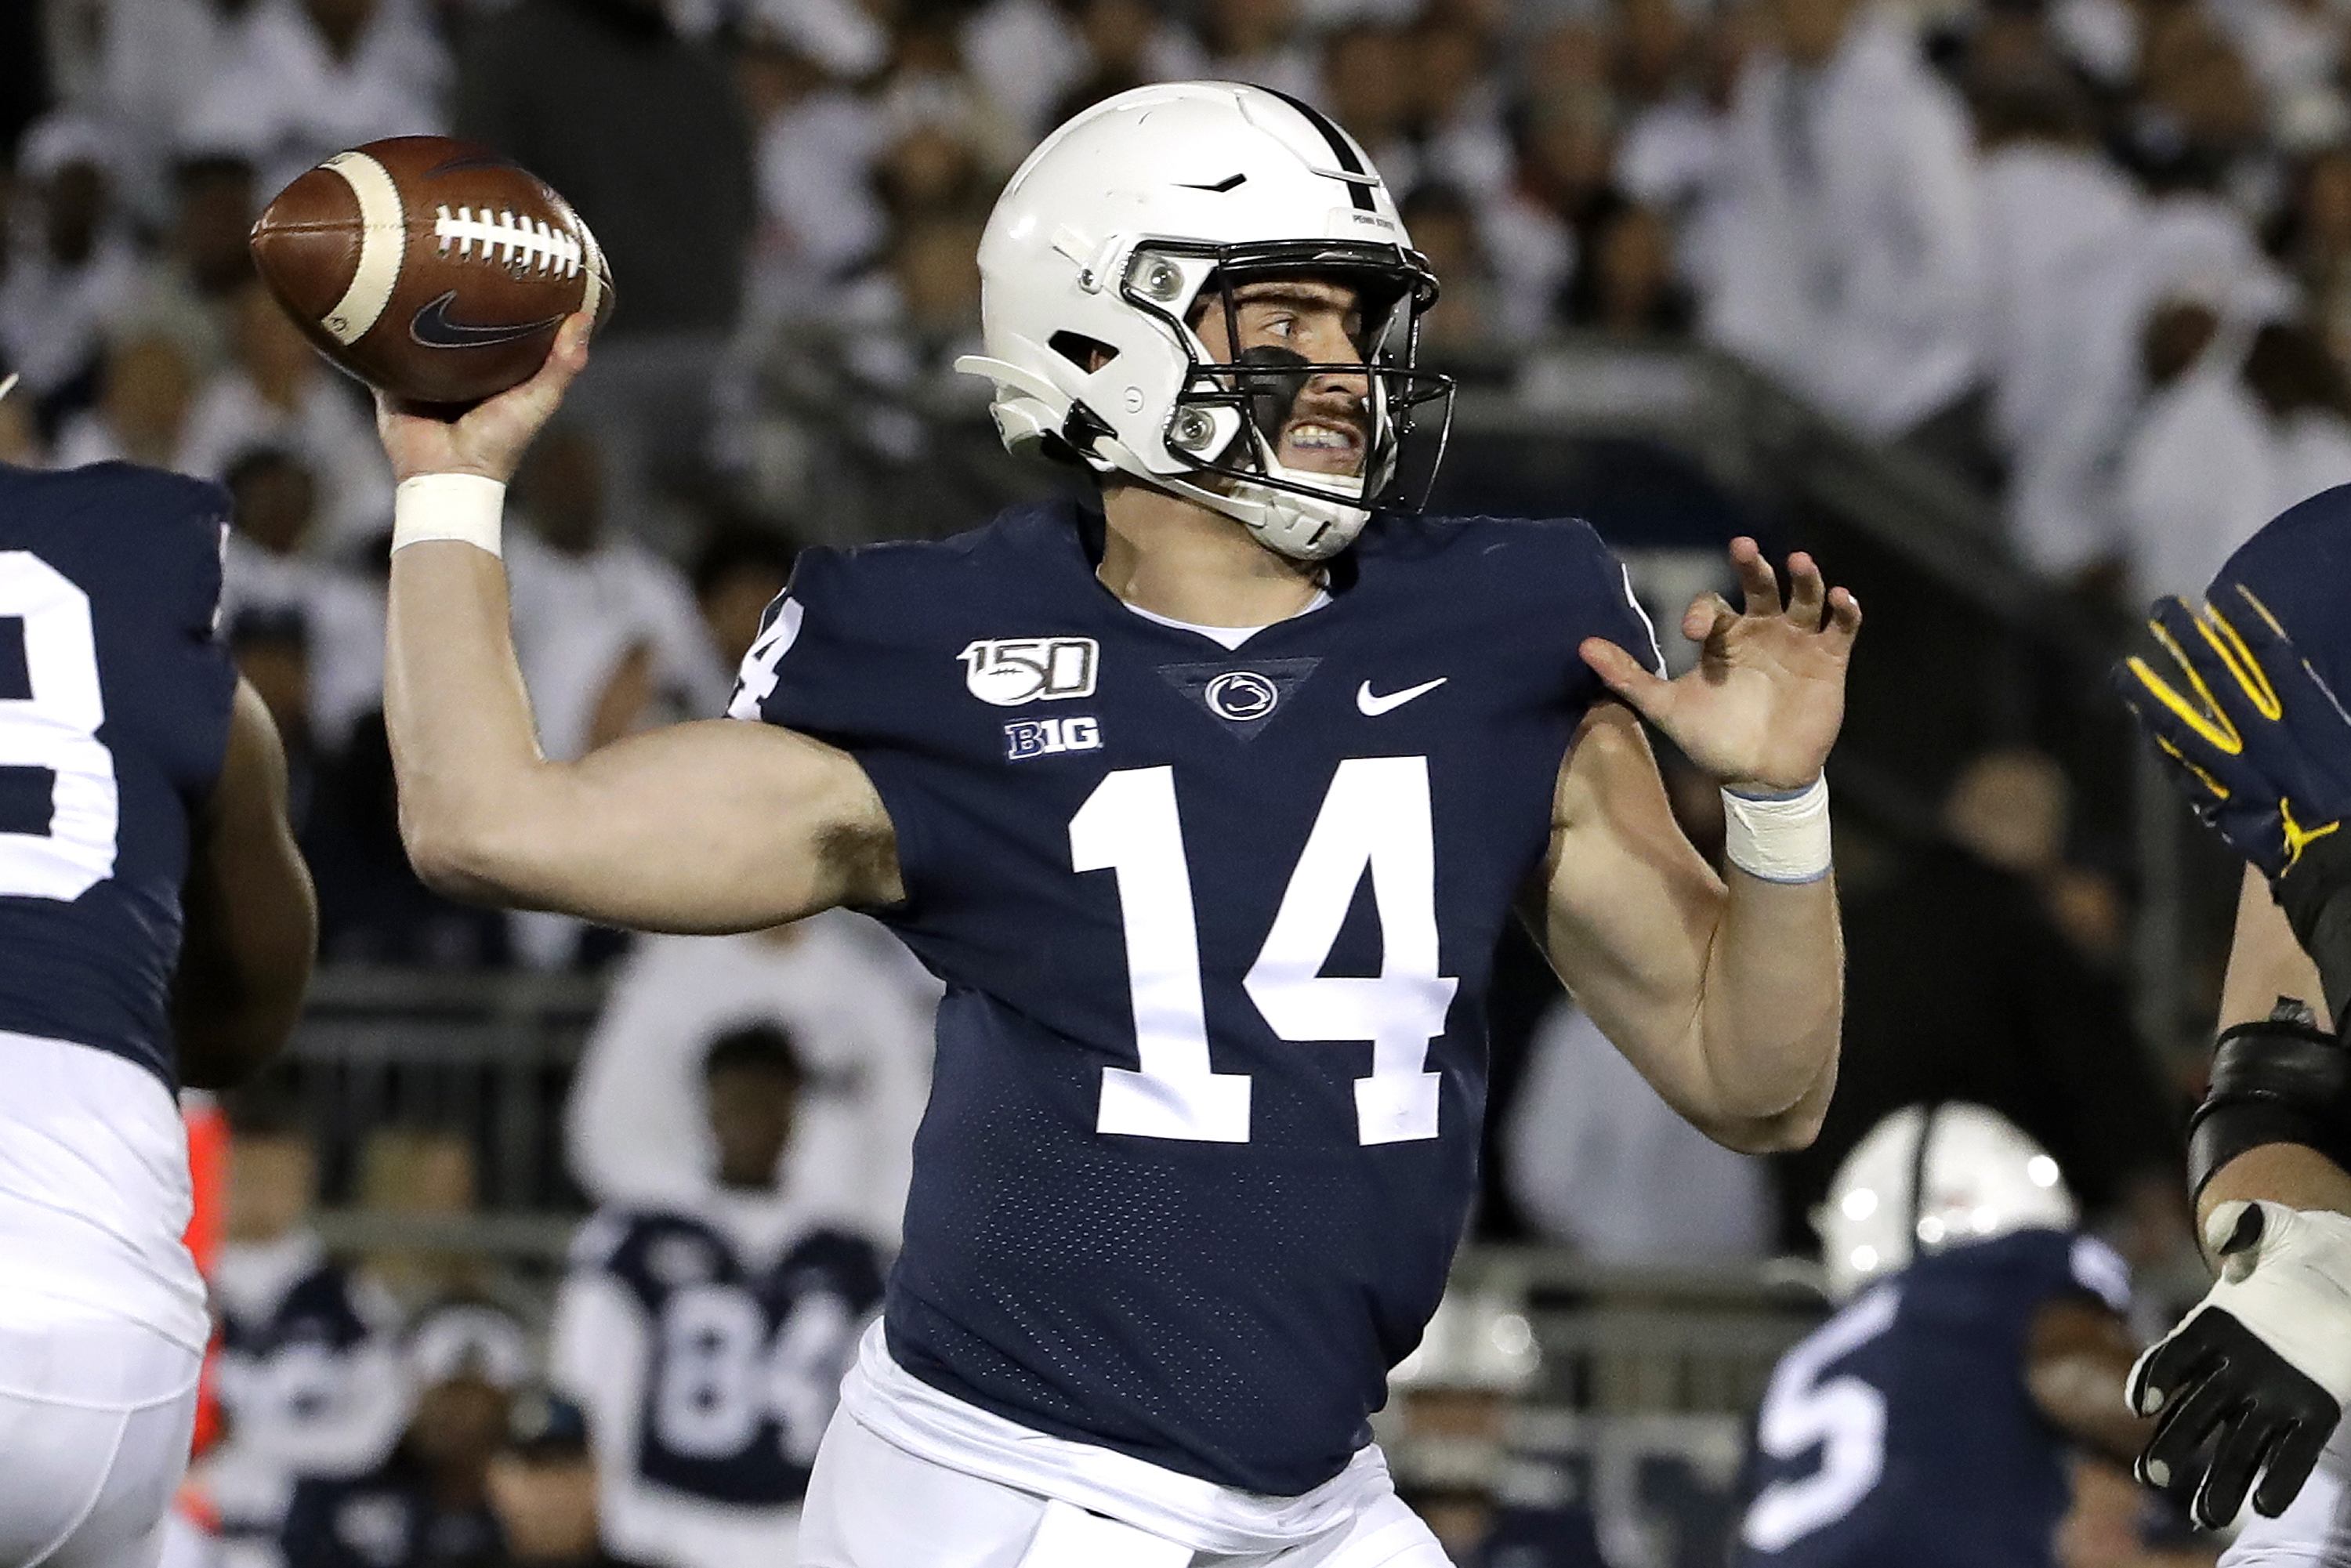 Clifford's 4 TDs lead No. 7 Penn State over No. 16 Michigan